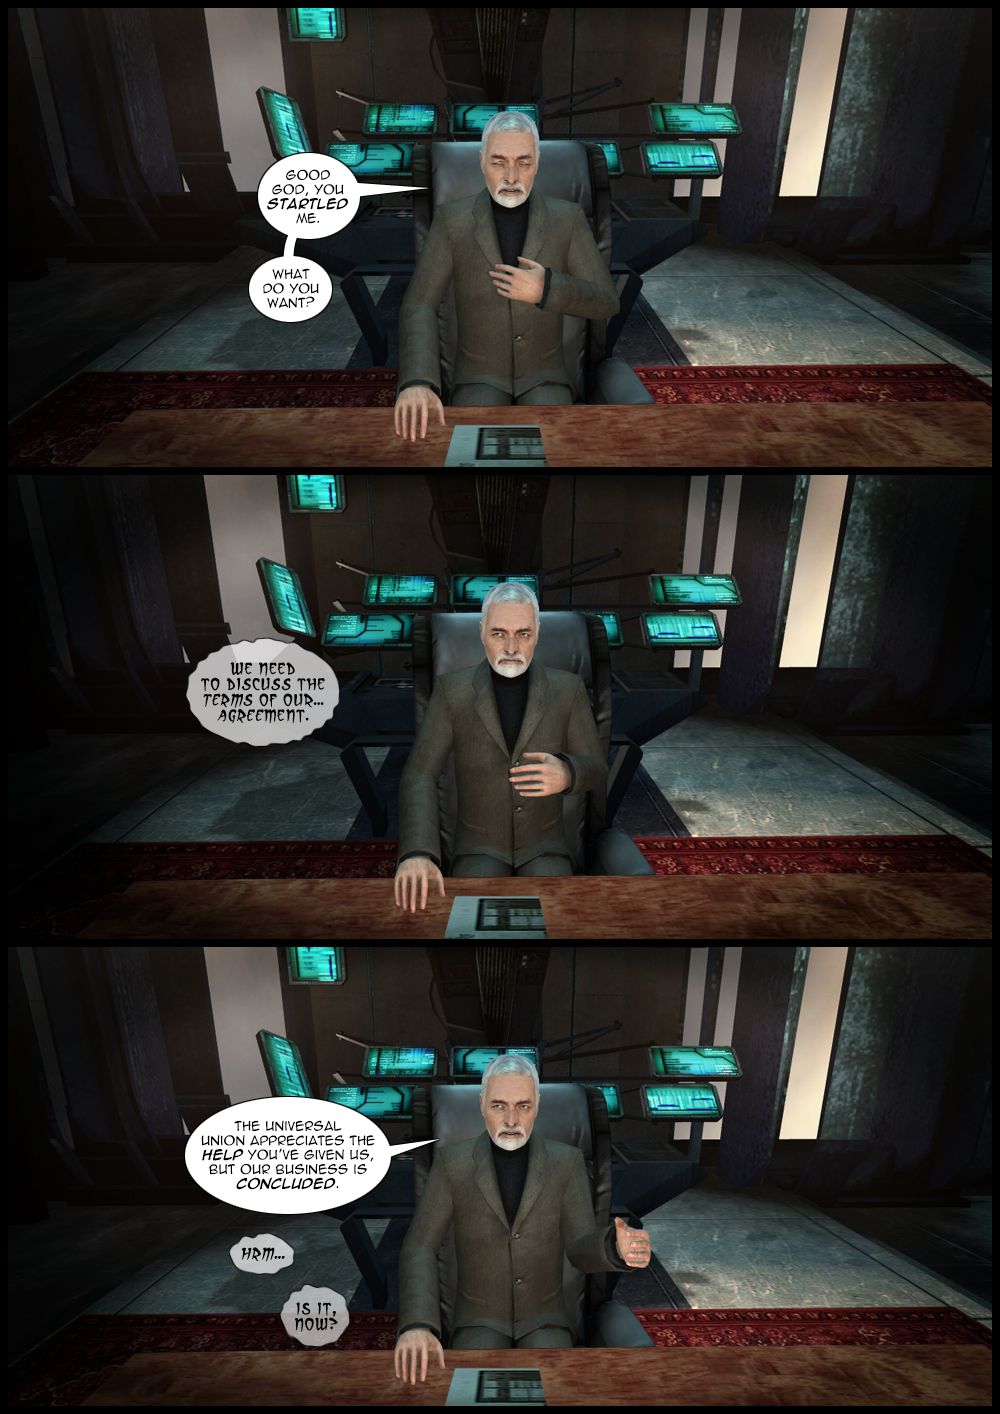 Breen complains that the voice has startled him and asks what they want. The voice replies that they need to discuss the terms of their agreement. With an angry expression, Breen retorts that the universal union appreciates the help he's given them, but their business is concluded. The voice asks is it, now.